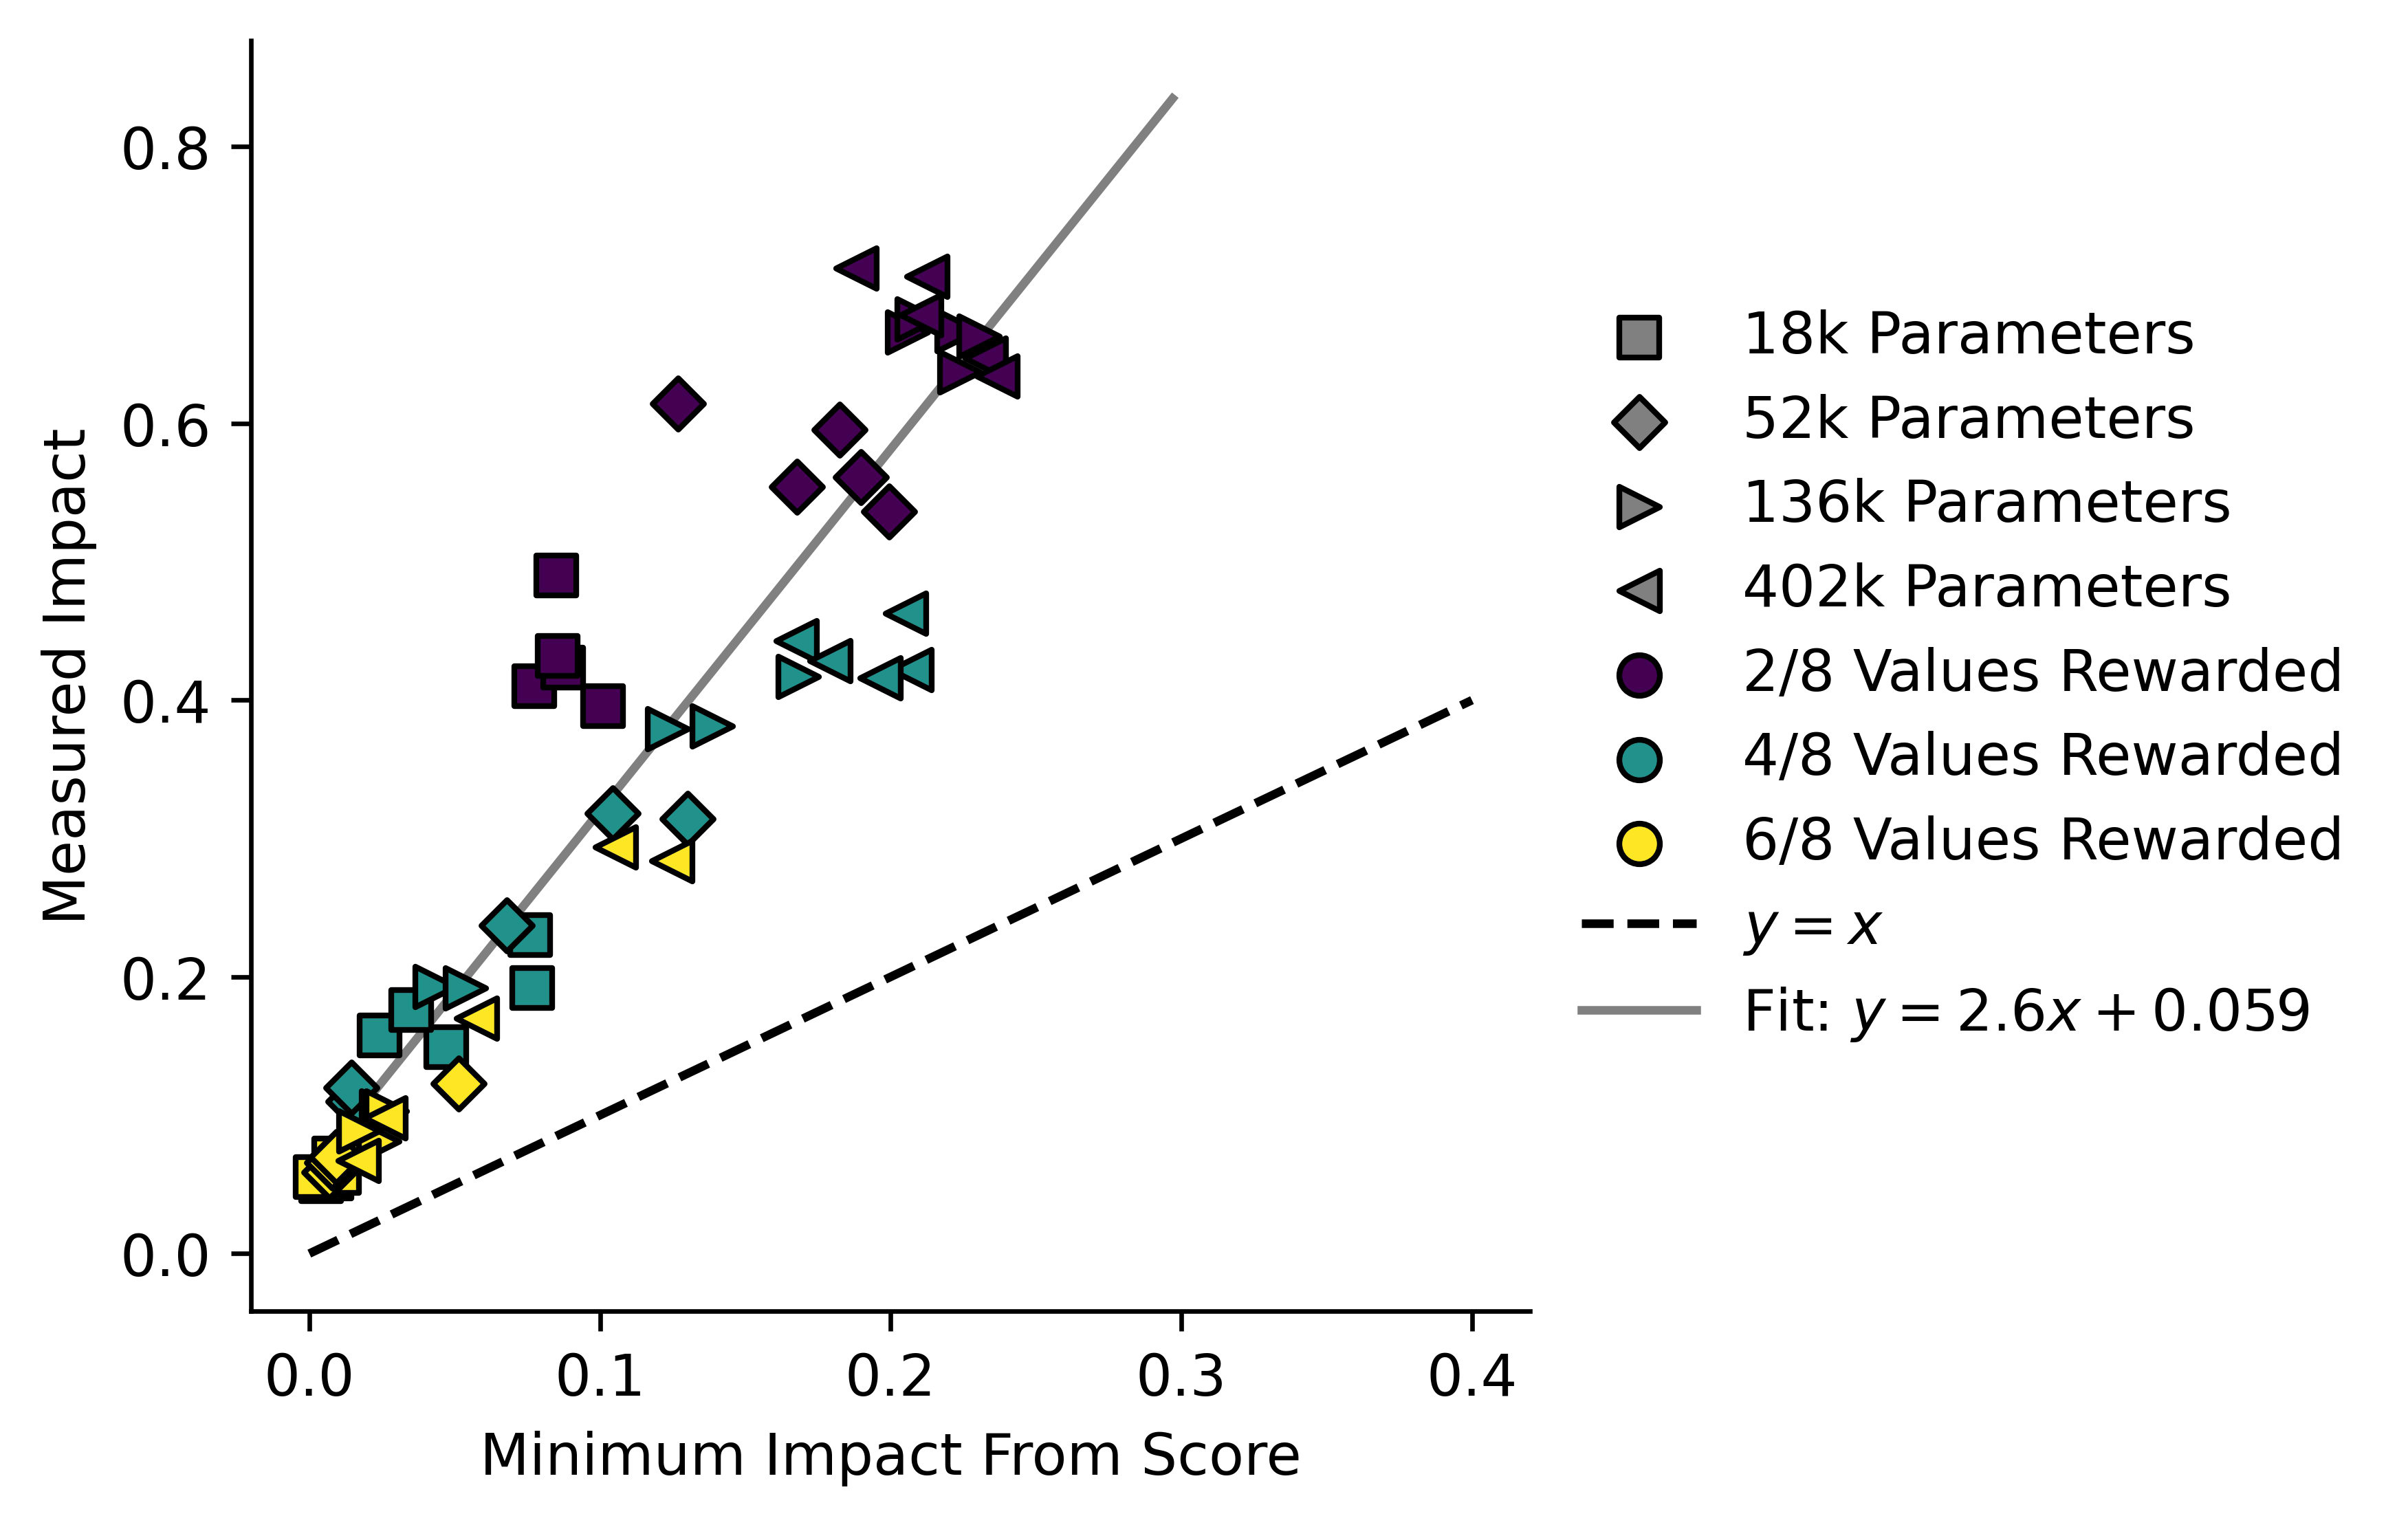 A model showing Measured Impact plotted against Minimum Impact From Score. The points form a plume around y = 2.6x + 0.059